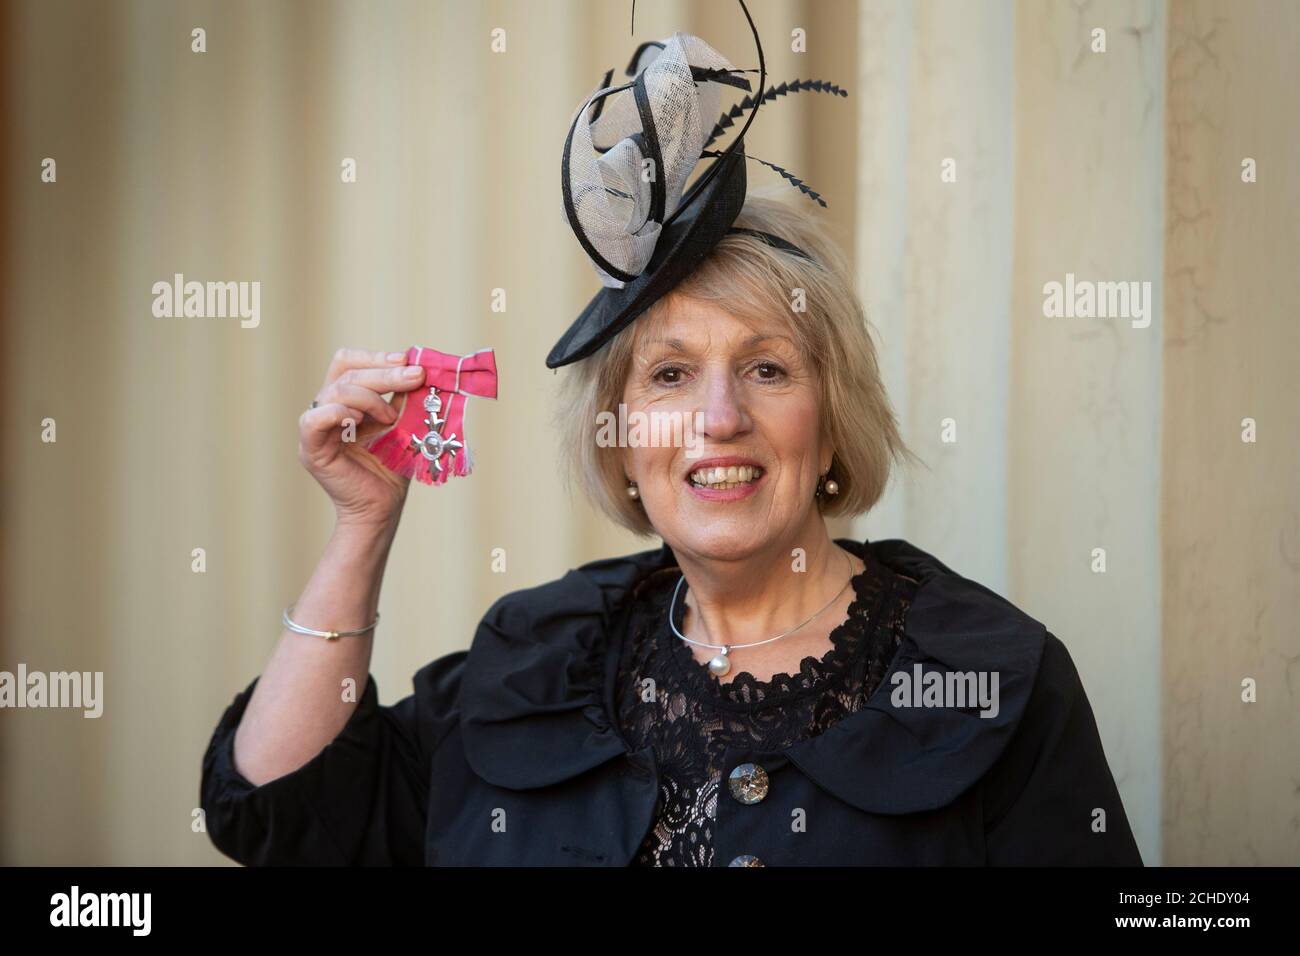 Margaret McCabe with her MBE (Member of the Order of the British Empire), which was presented at an investiture ceremony at Buckingham Palace, London. Stock Photo